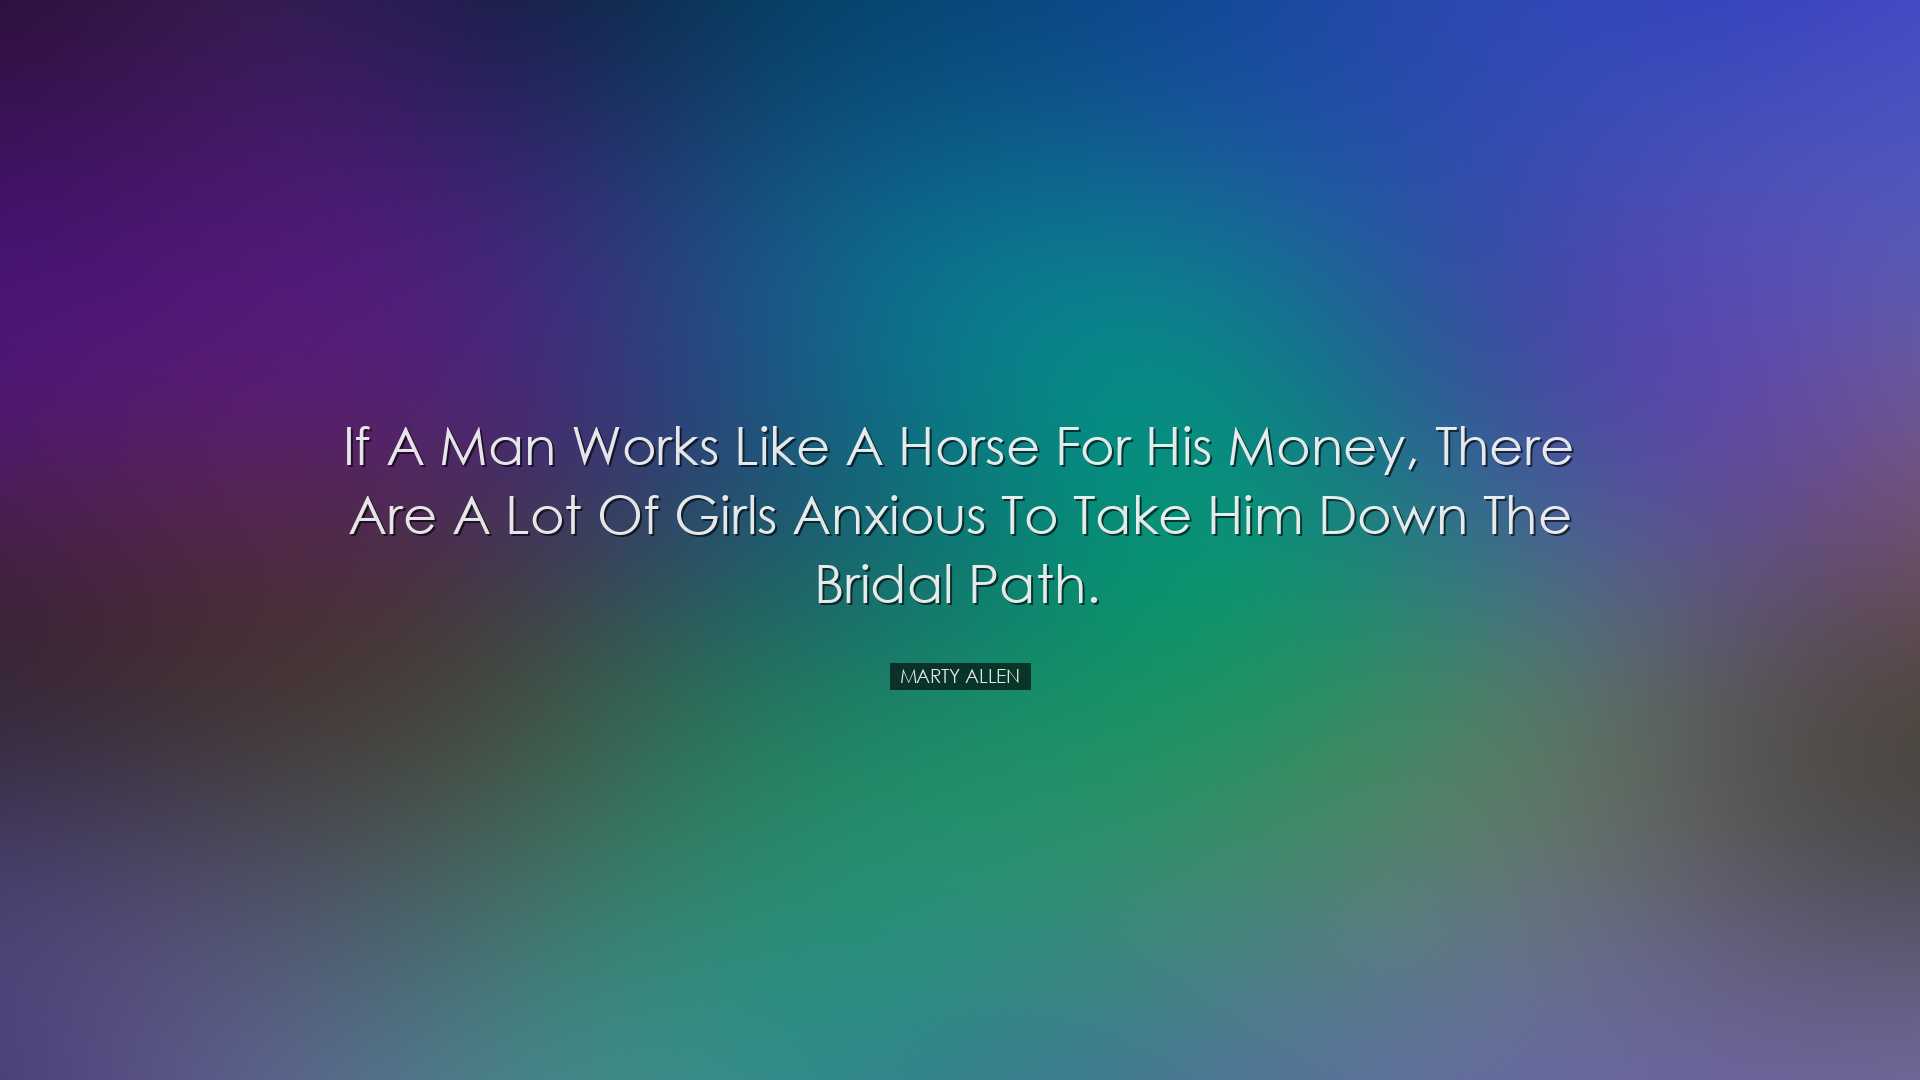 If a man works like a horse for his money, there are a lot of girl